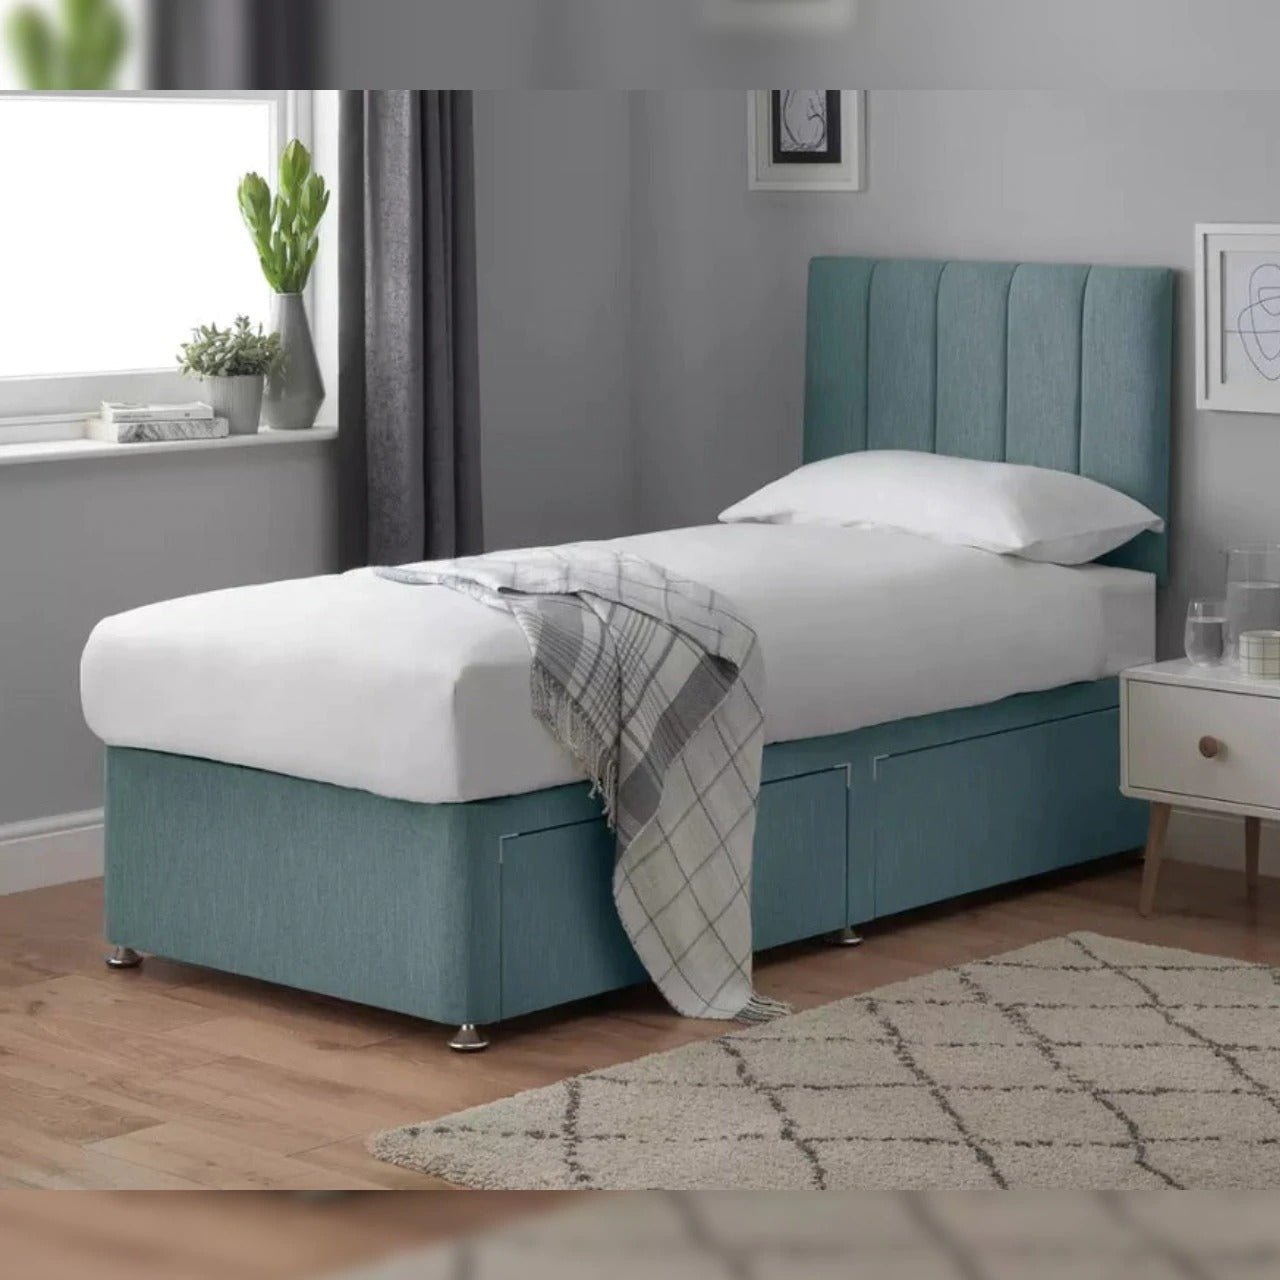 Single Bed, Designer Single Bed, Single Bed Price, Single Bed With Storage